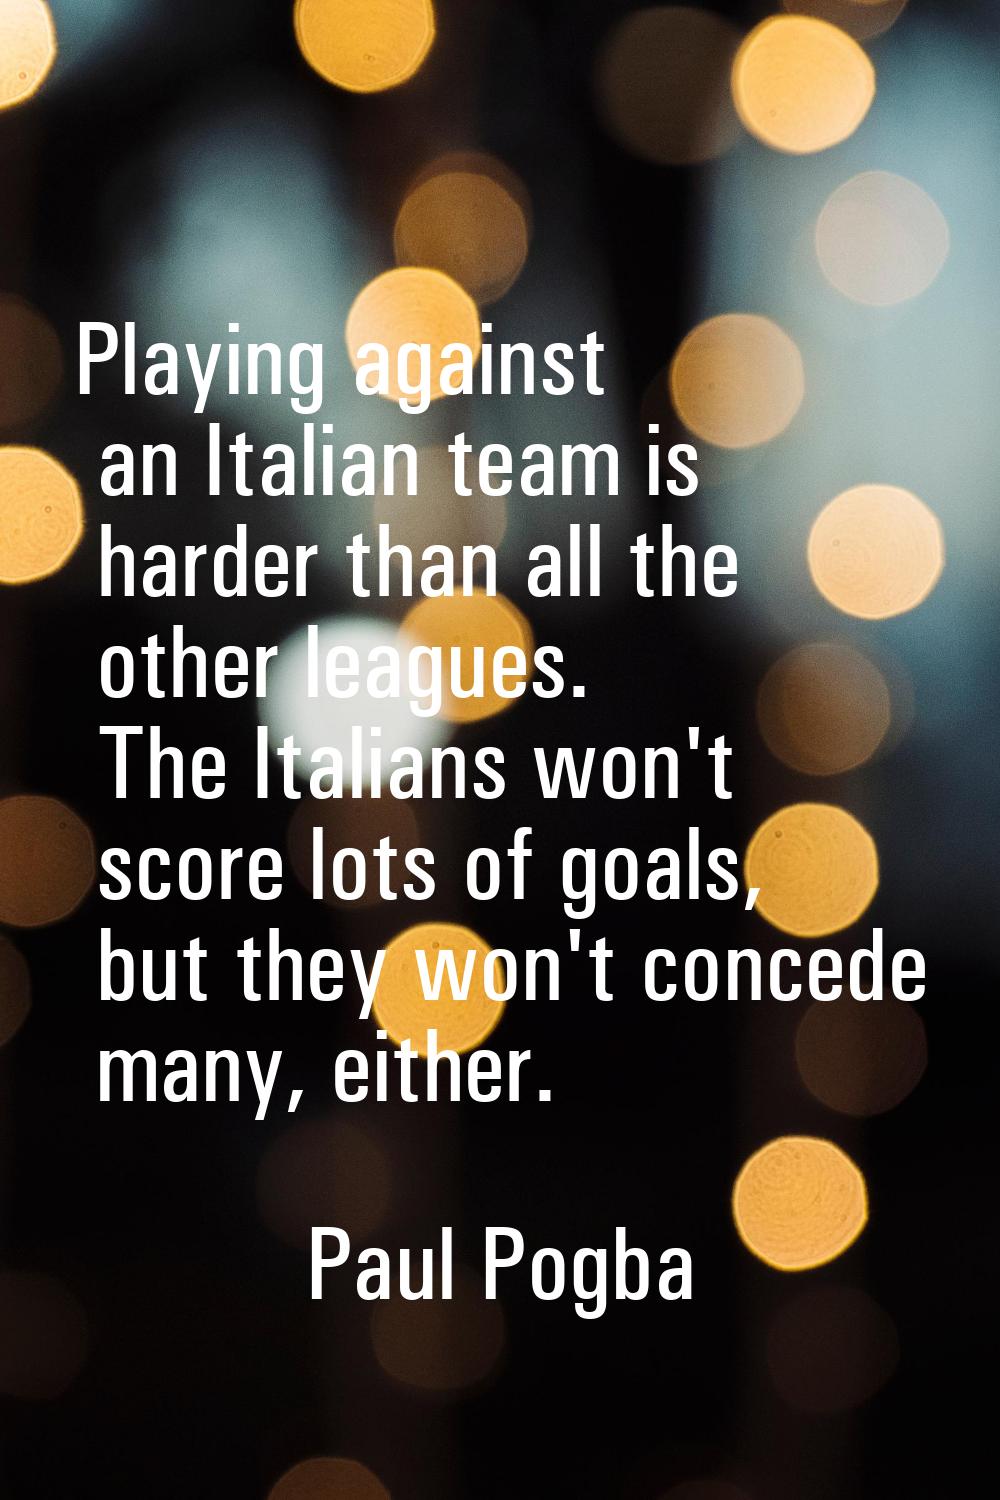 Playing against an Italian team is harder than all the other leagues. The Italians won't score lots